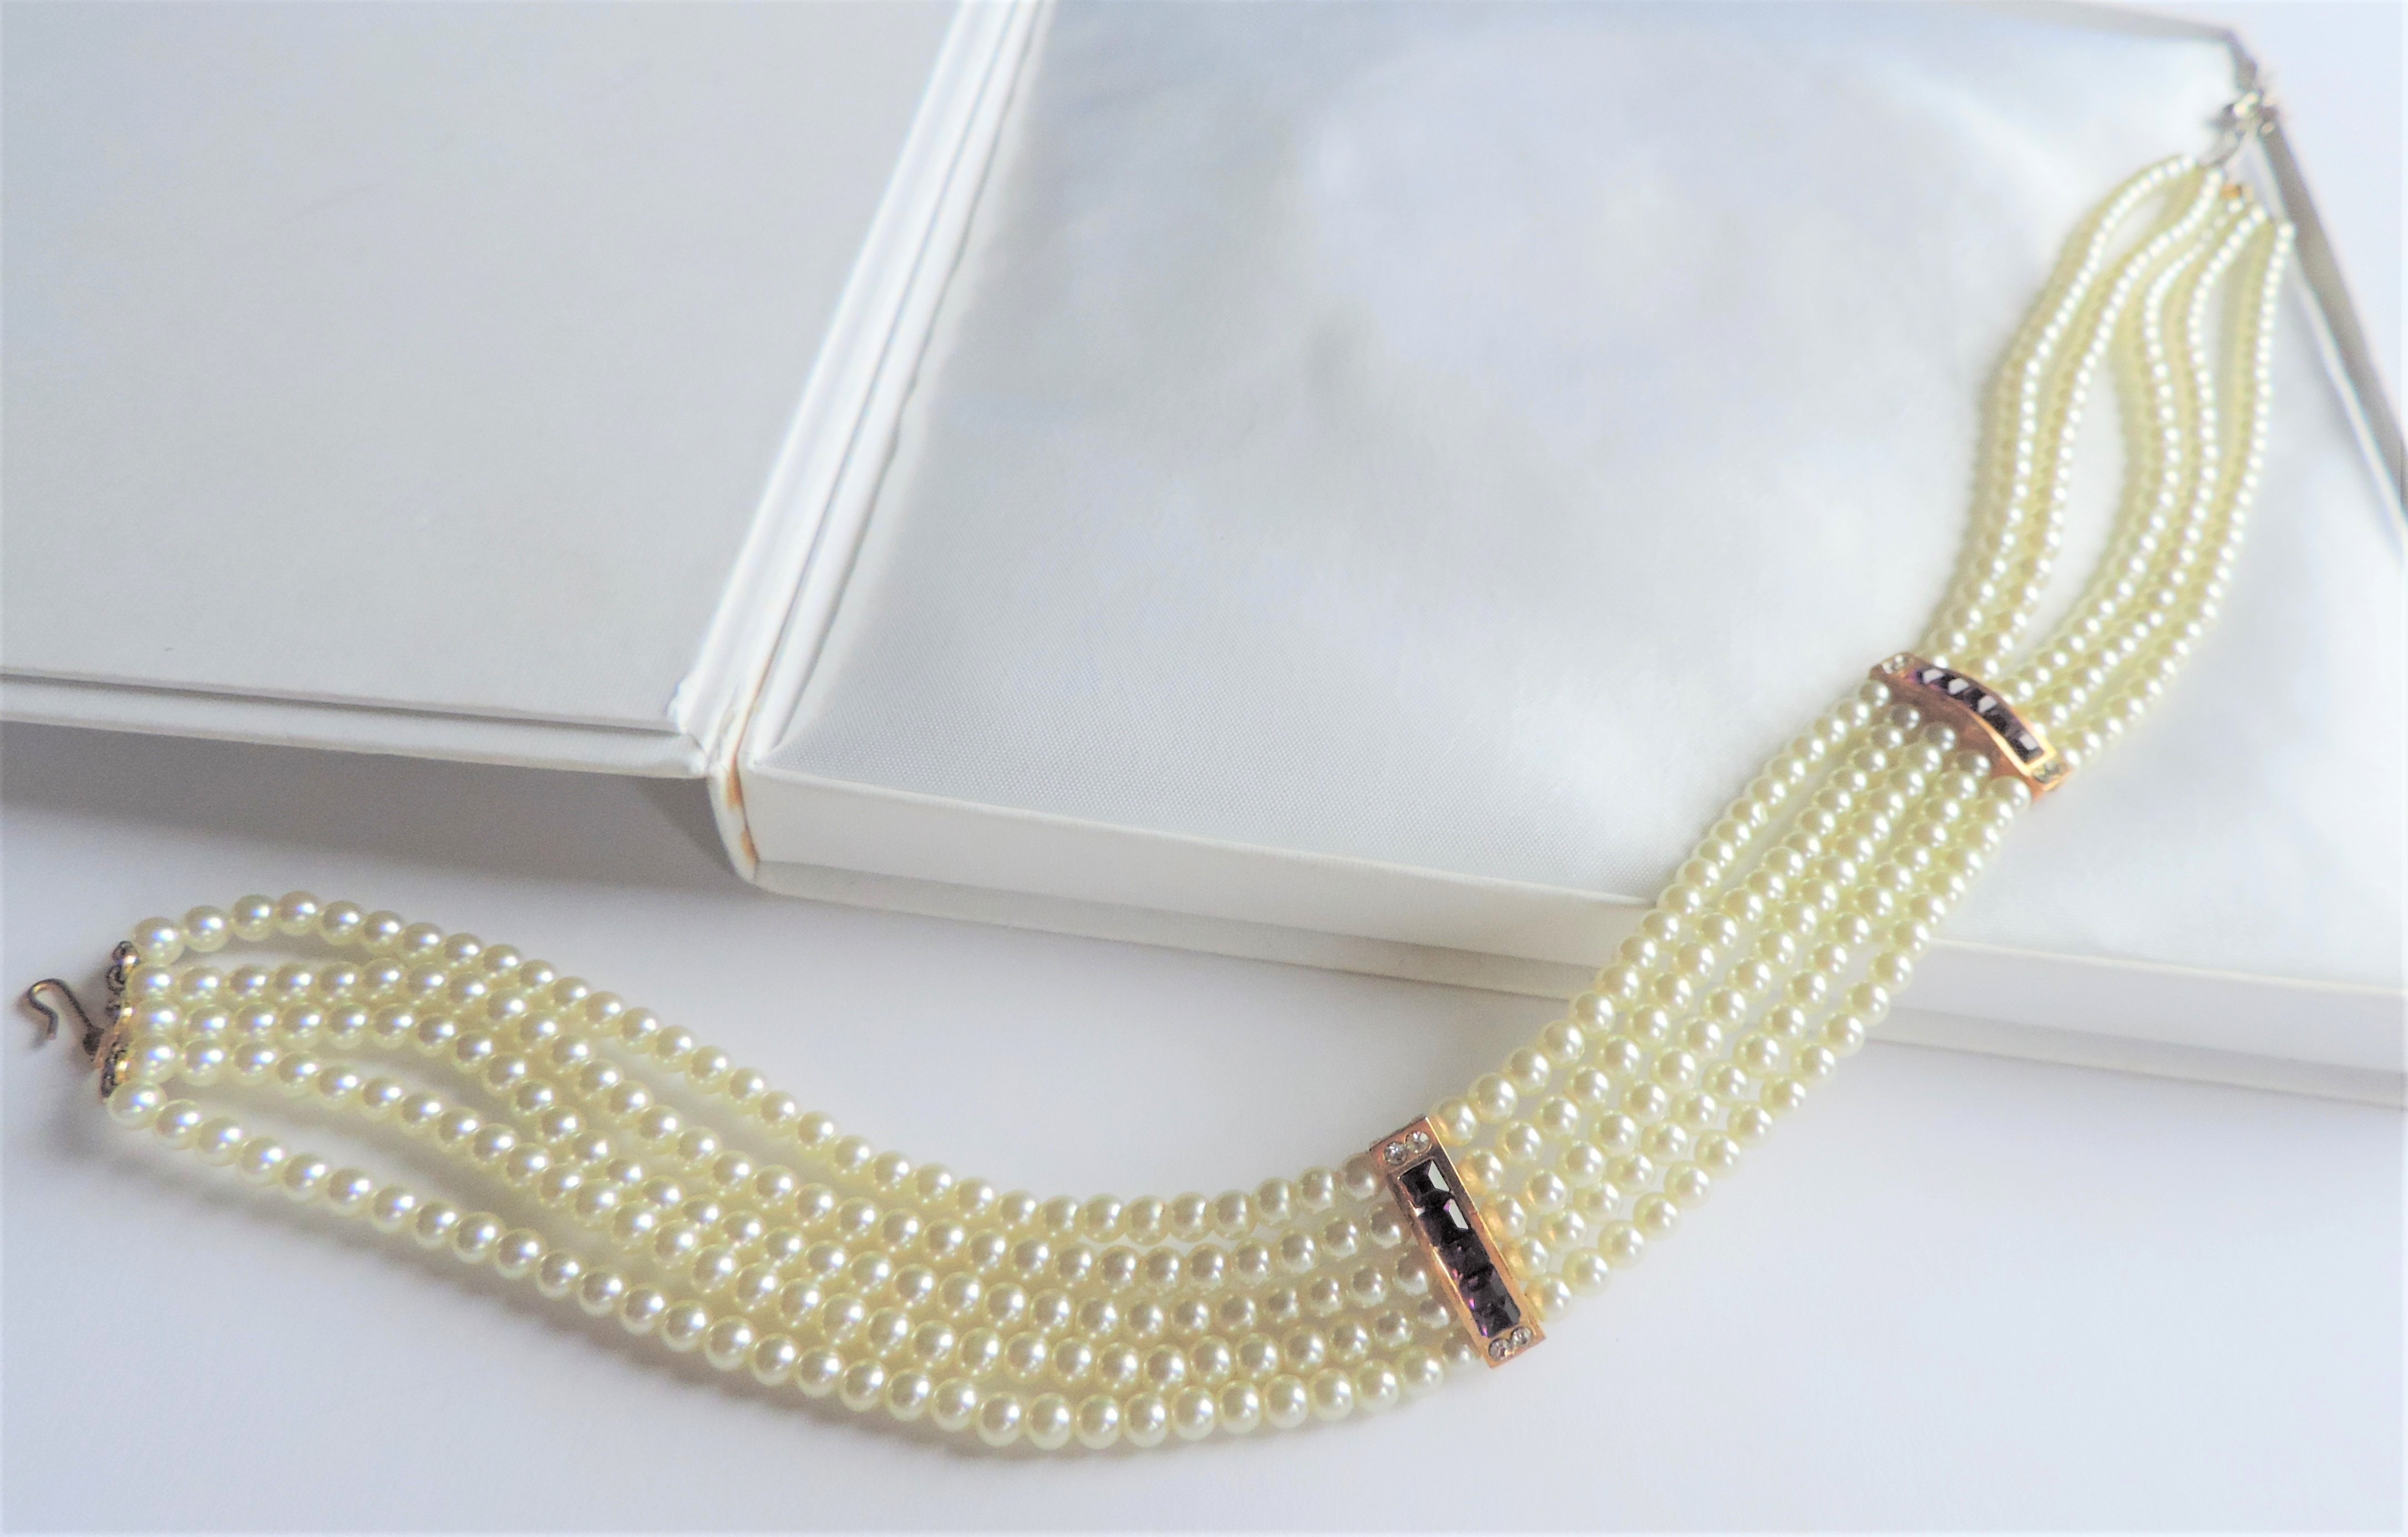 5 Strand Pearl Choker Necklace with Gift Box - Image 4 of 4